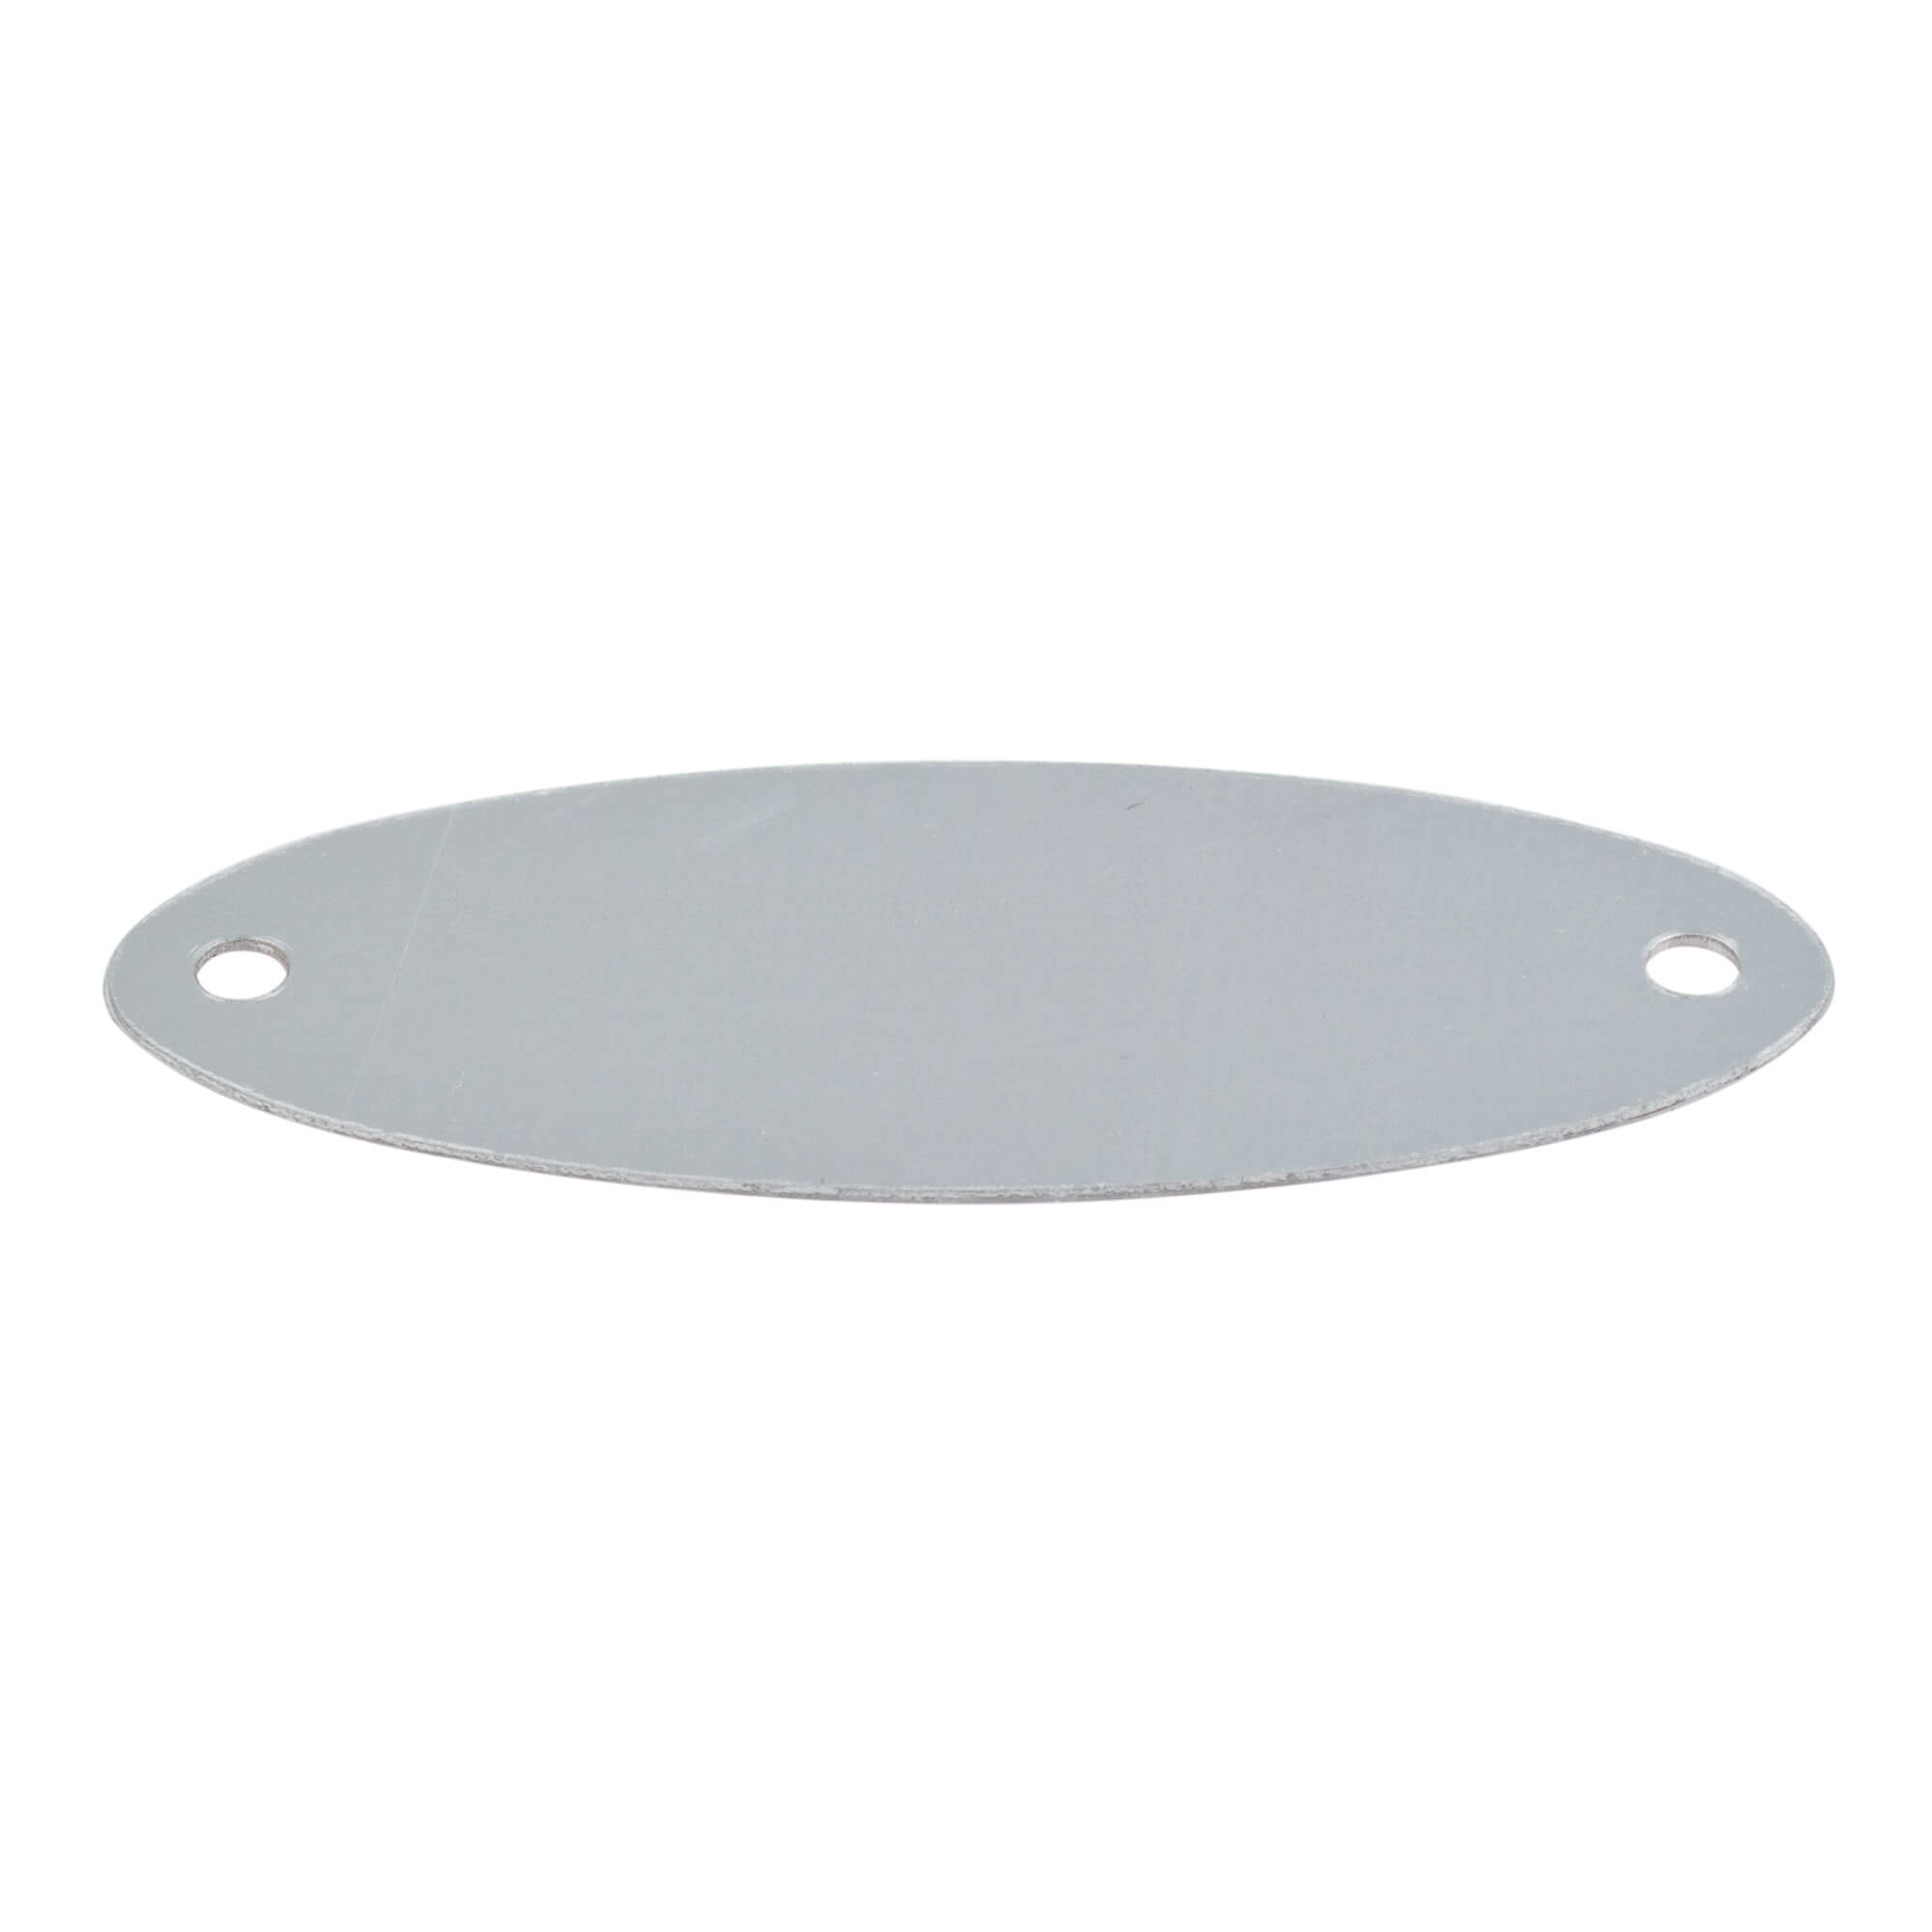 Cancan MJ label - spare part for Cancan manual juicer